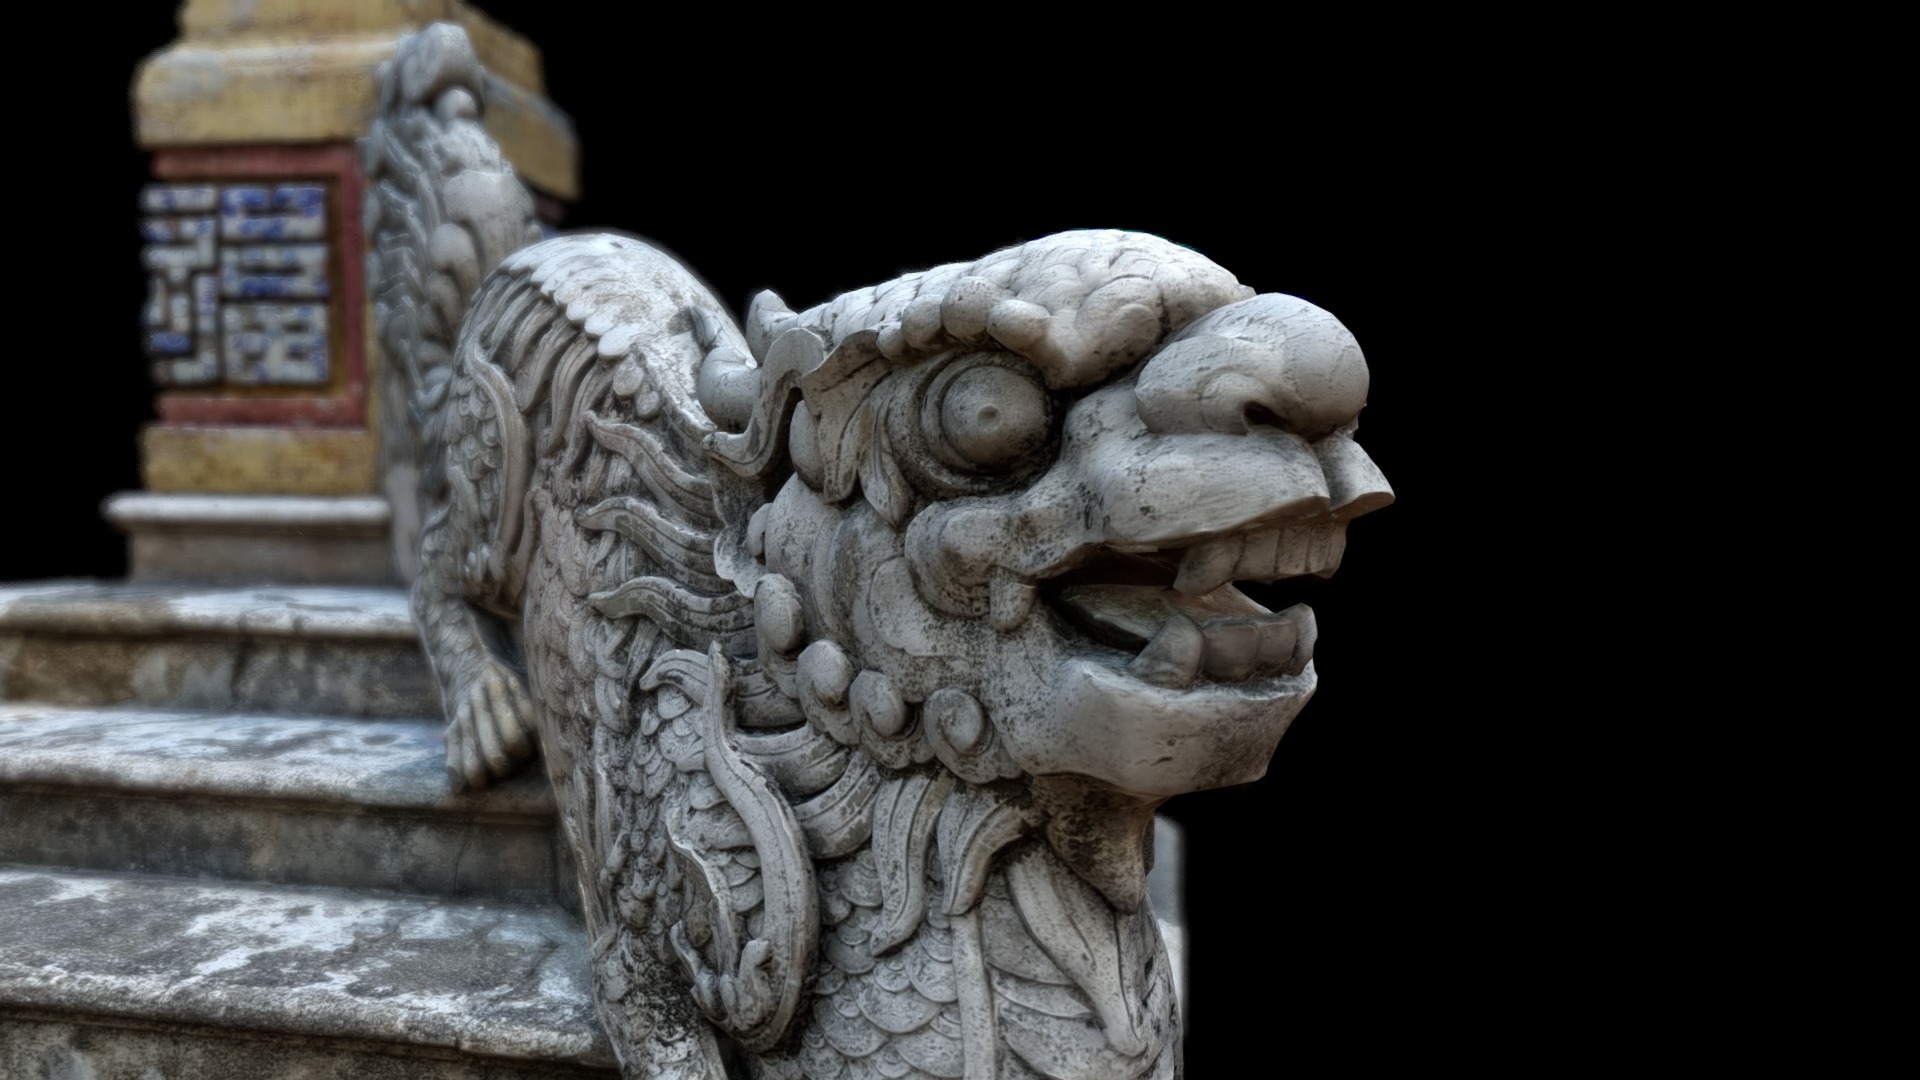 3D model Dragon No2 from the Thế Tổ Miếu temple in Hue Vi - This is a 3D model of the Dragon No2 from the Thế Tổ Miếu temple in Hue Vi. The 3D model is about a stone sculpture of a lion.